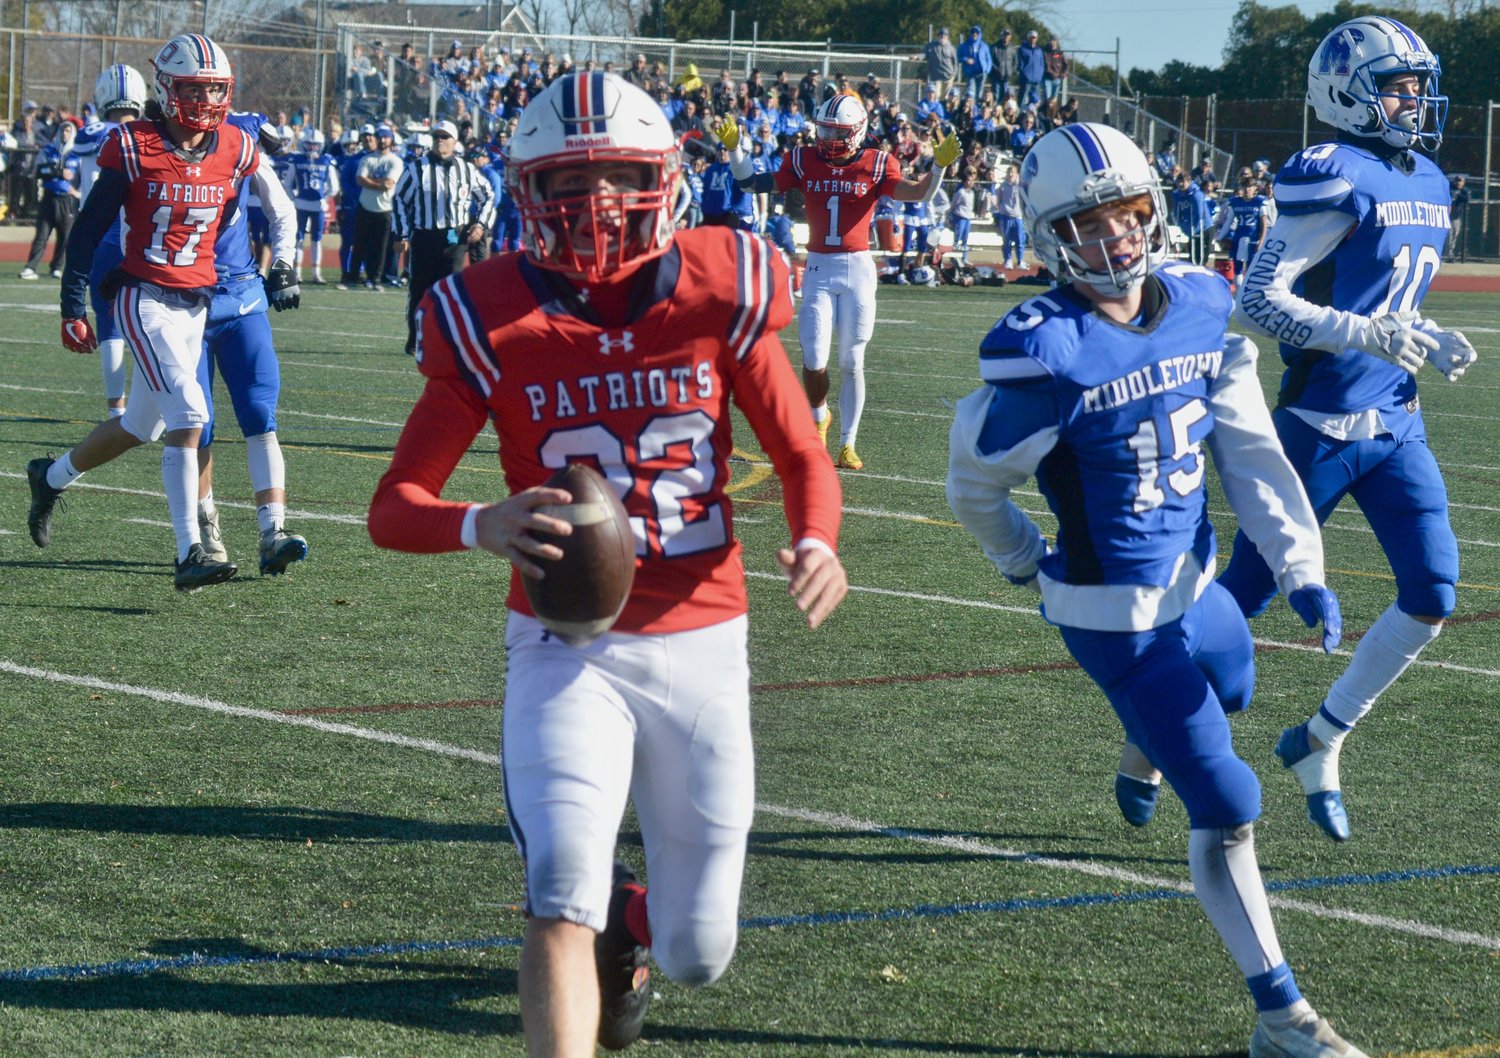 The Patriots’ Dylan Brandariz runs into the end zone for what appeared to be a touchdown in the fourth quarter, but a holding call against Portsmouth negated the play. Portsmouth would go on to score a TD anyway.